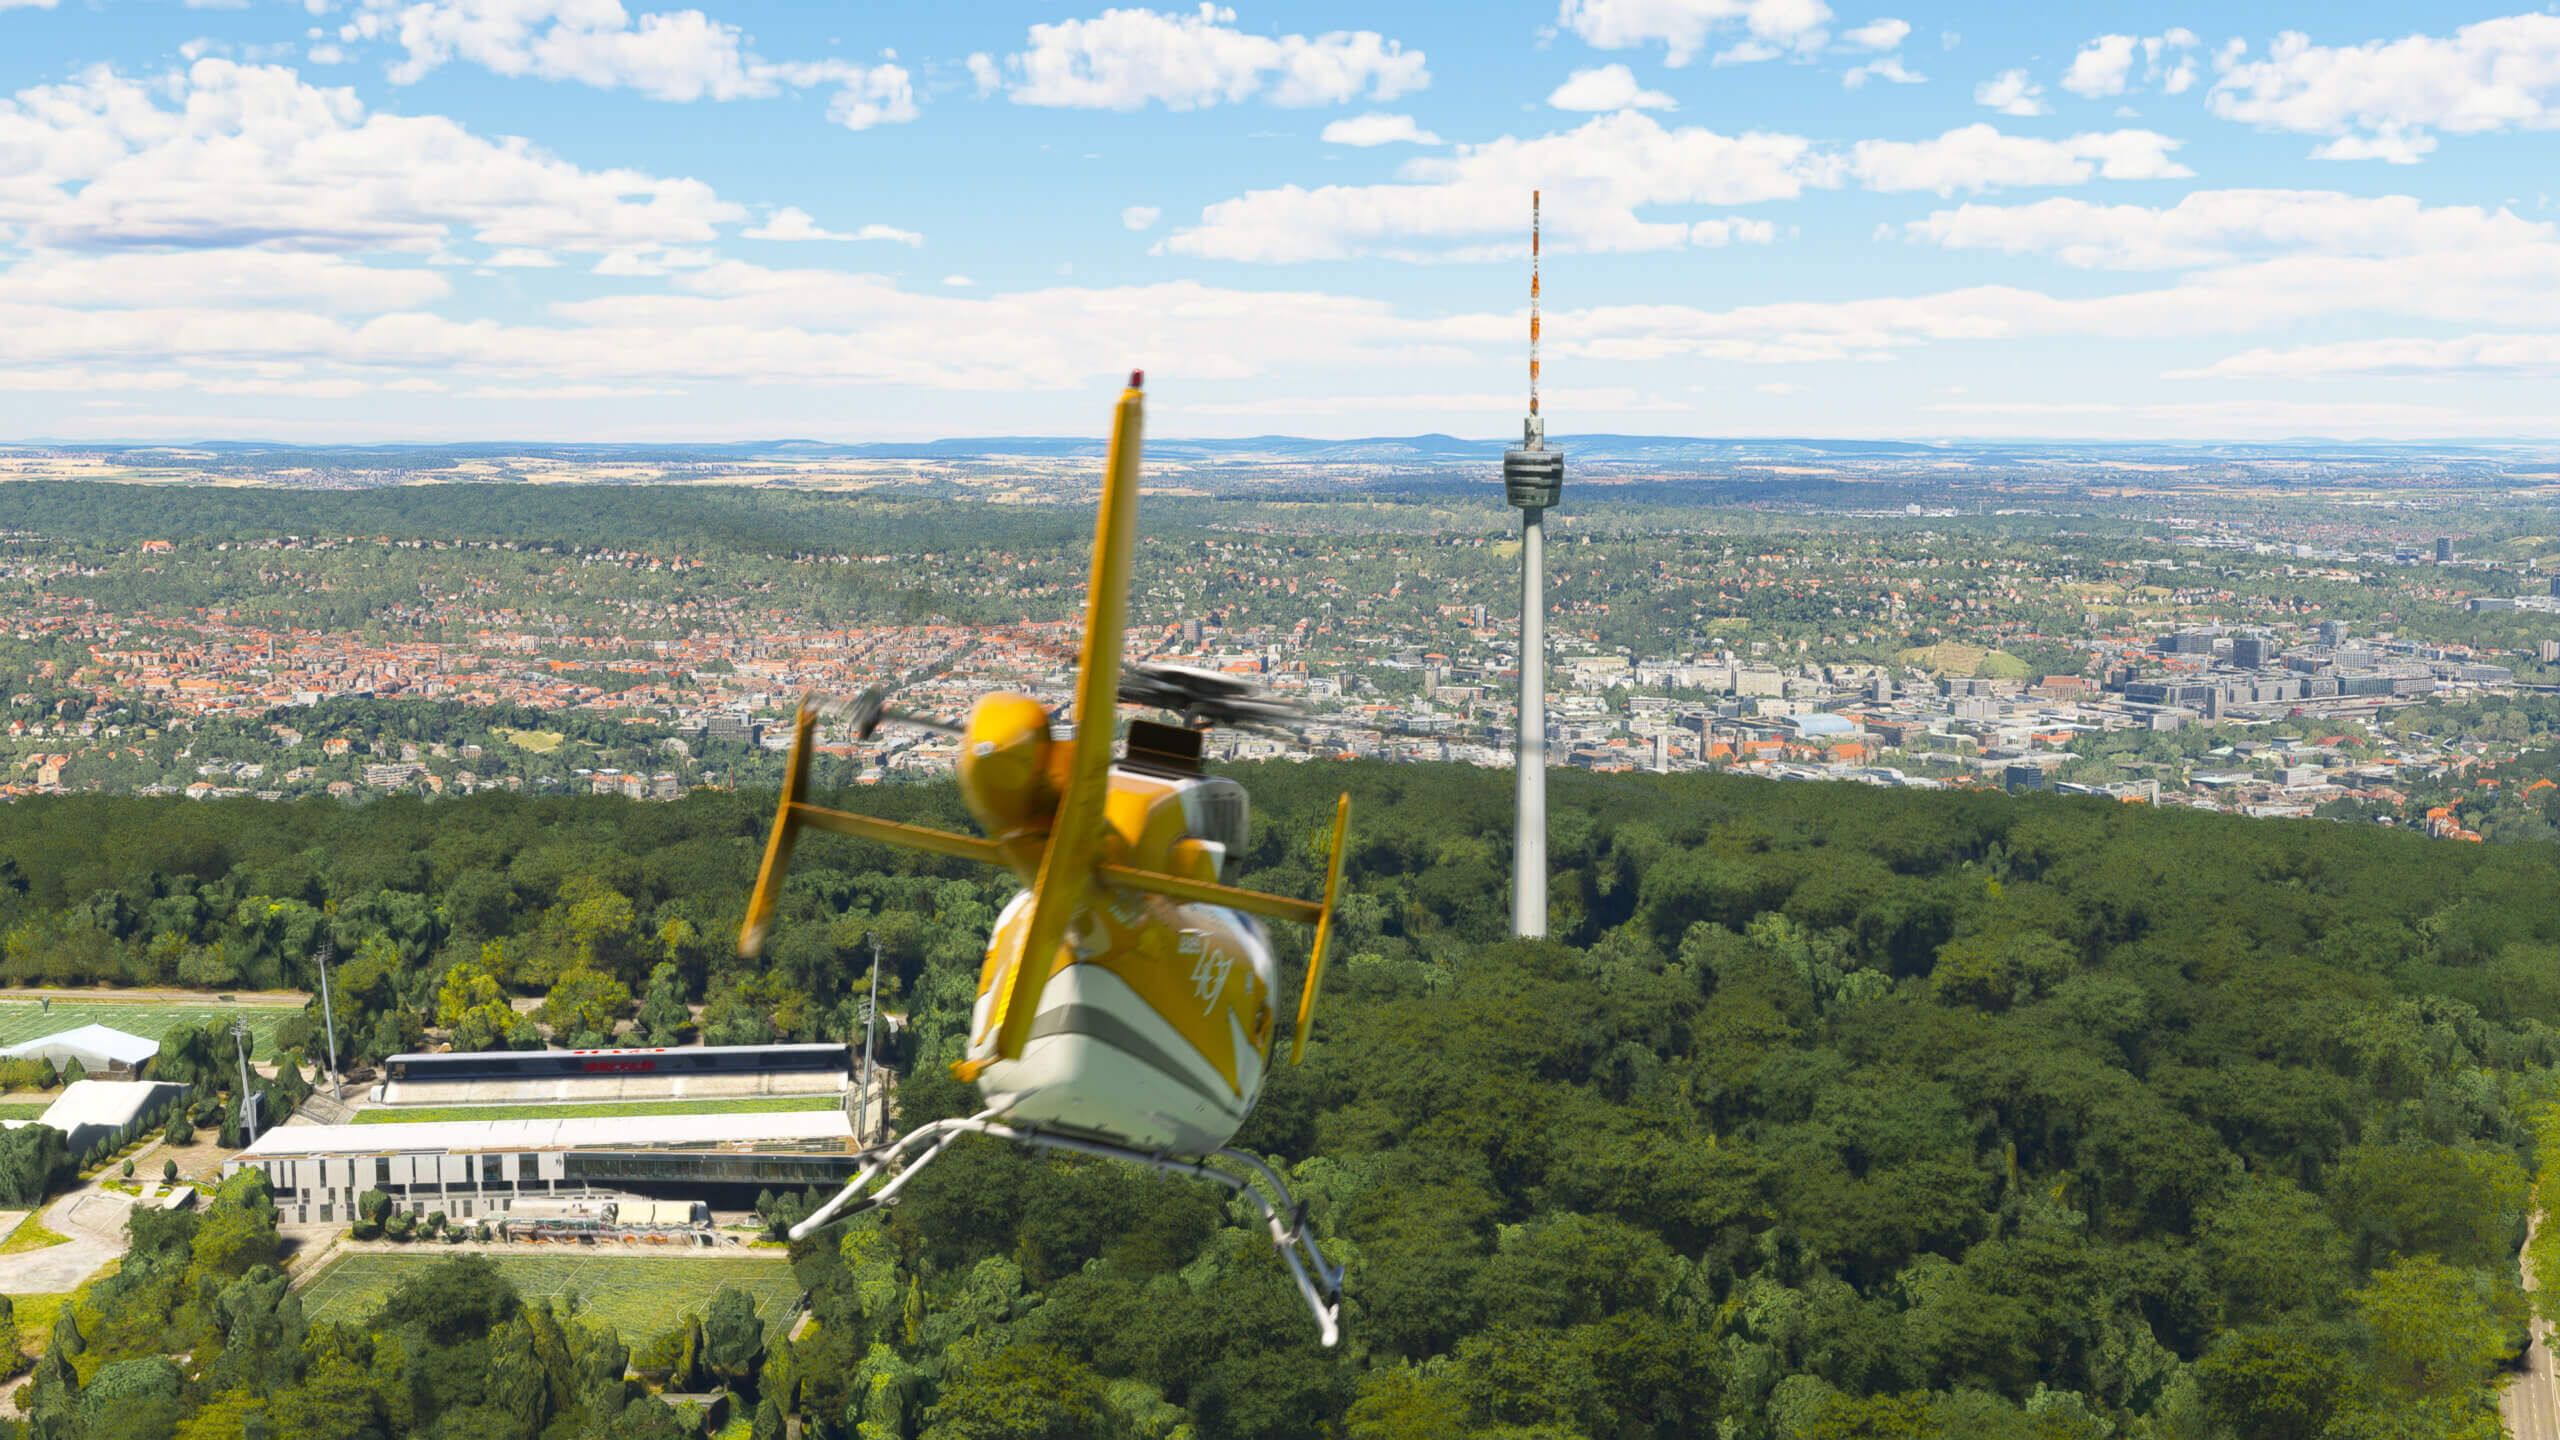 A helicopter flies towards a communications tower in Germany.